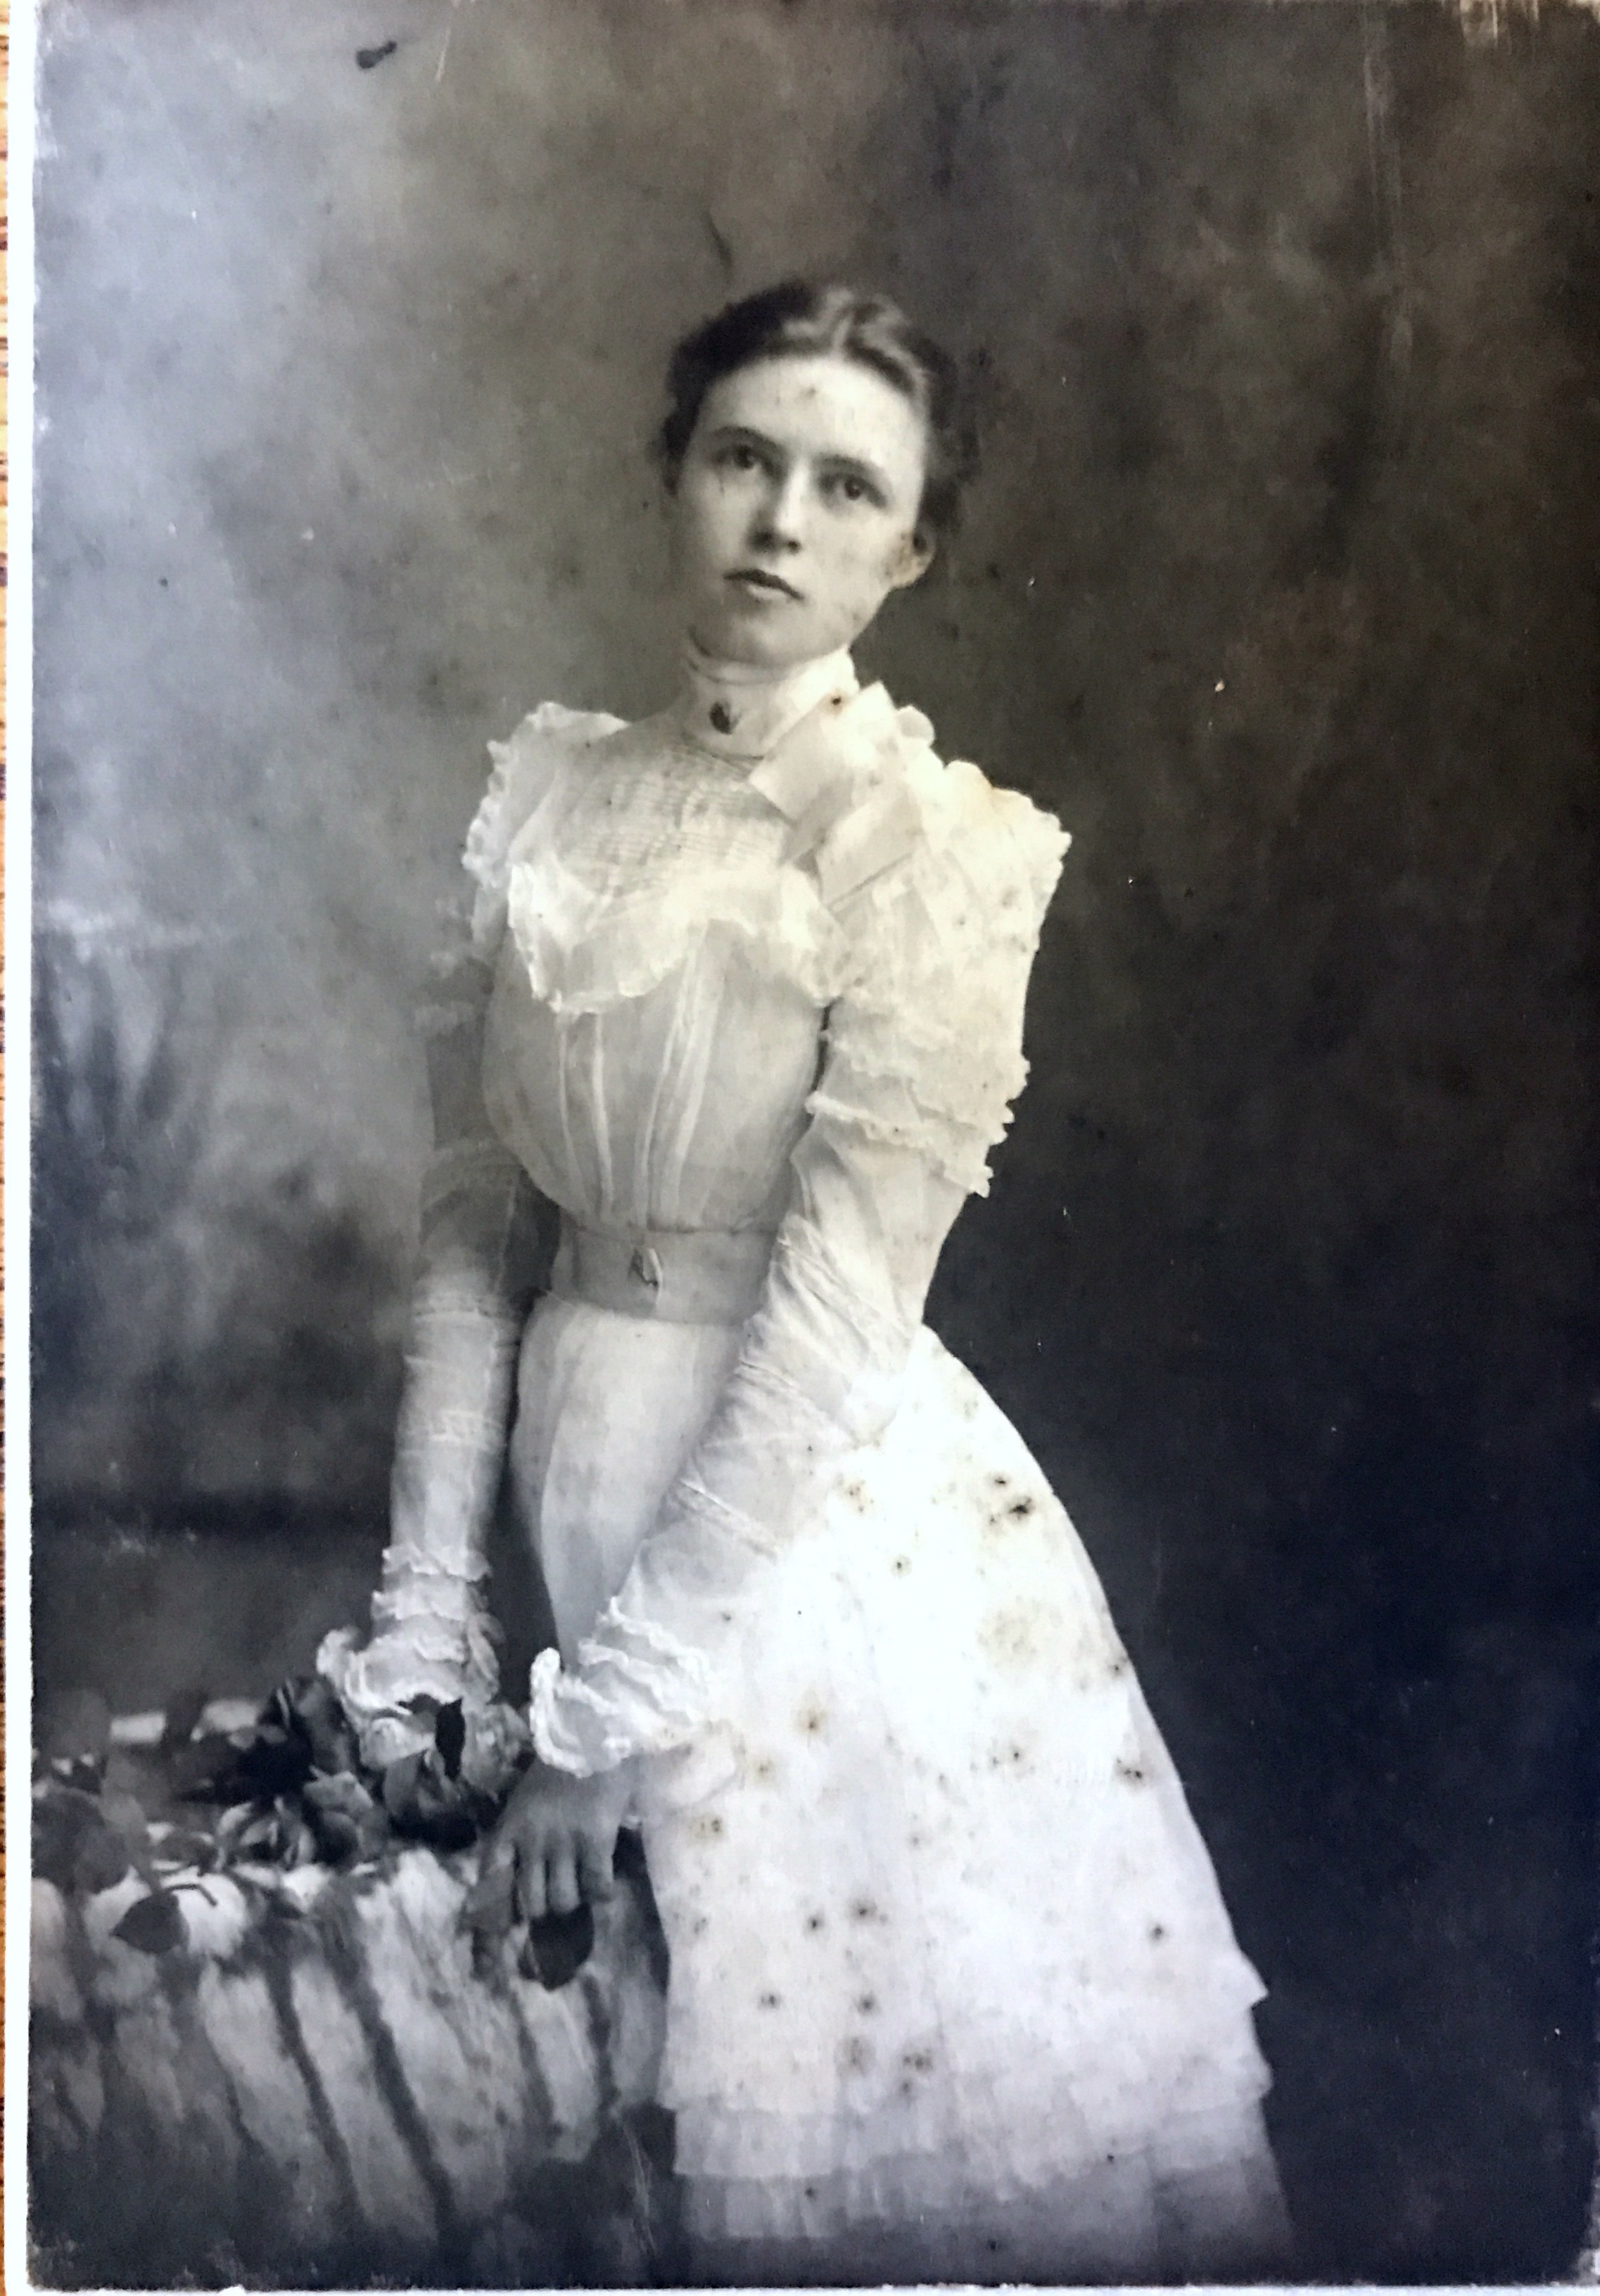 Madeleine Varney was born on 10/13/1880.  She was a Chemistry and Physics teacher at a San Francisco high school  and was married to Major Morris. She died on 05/25/1952.